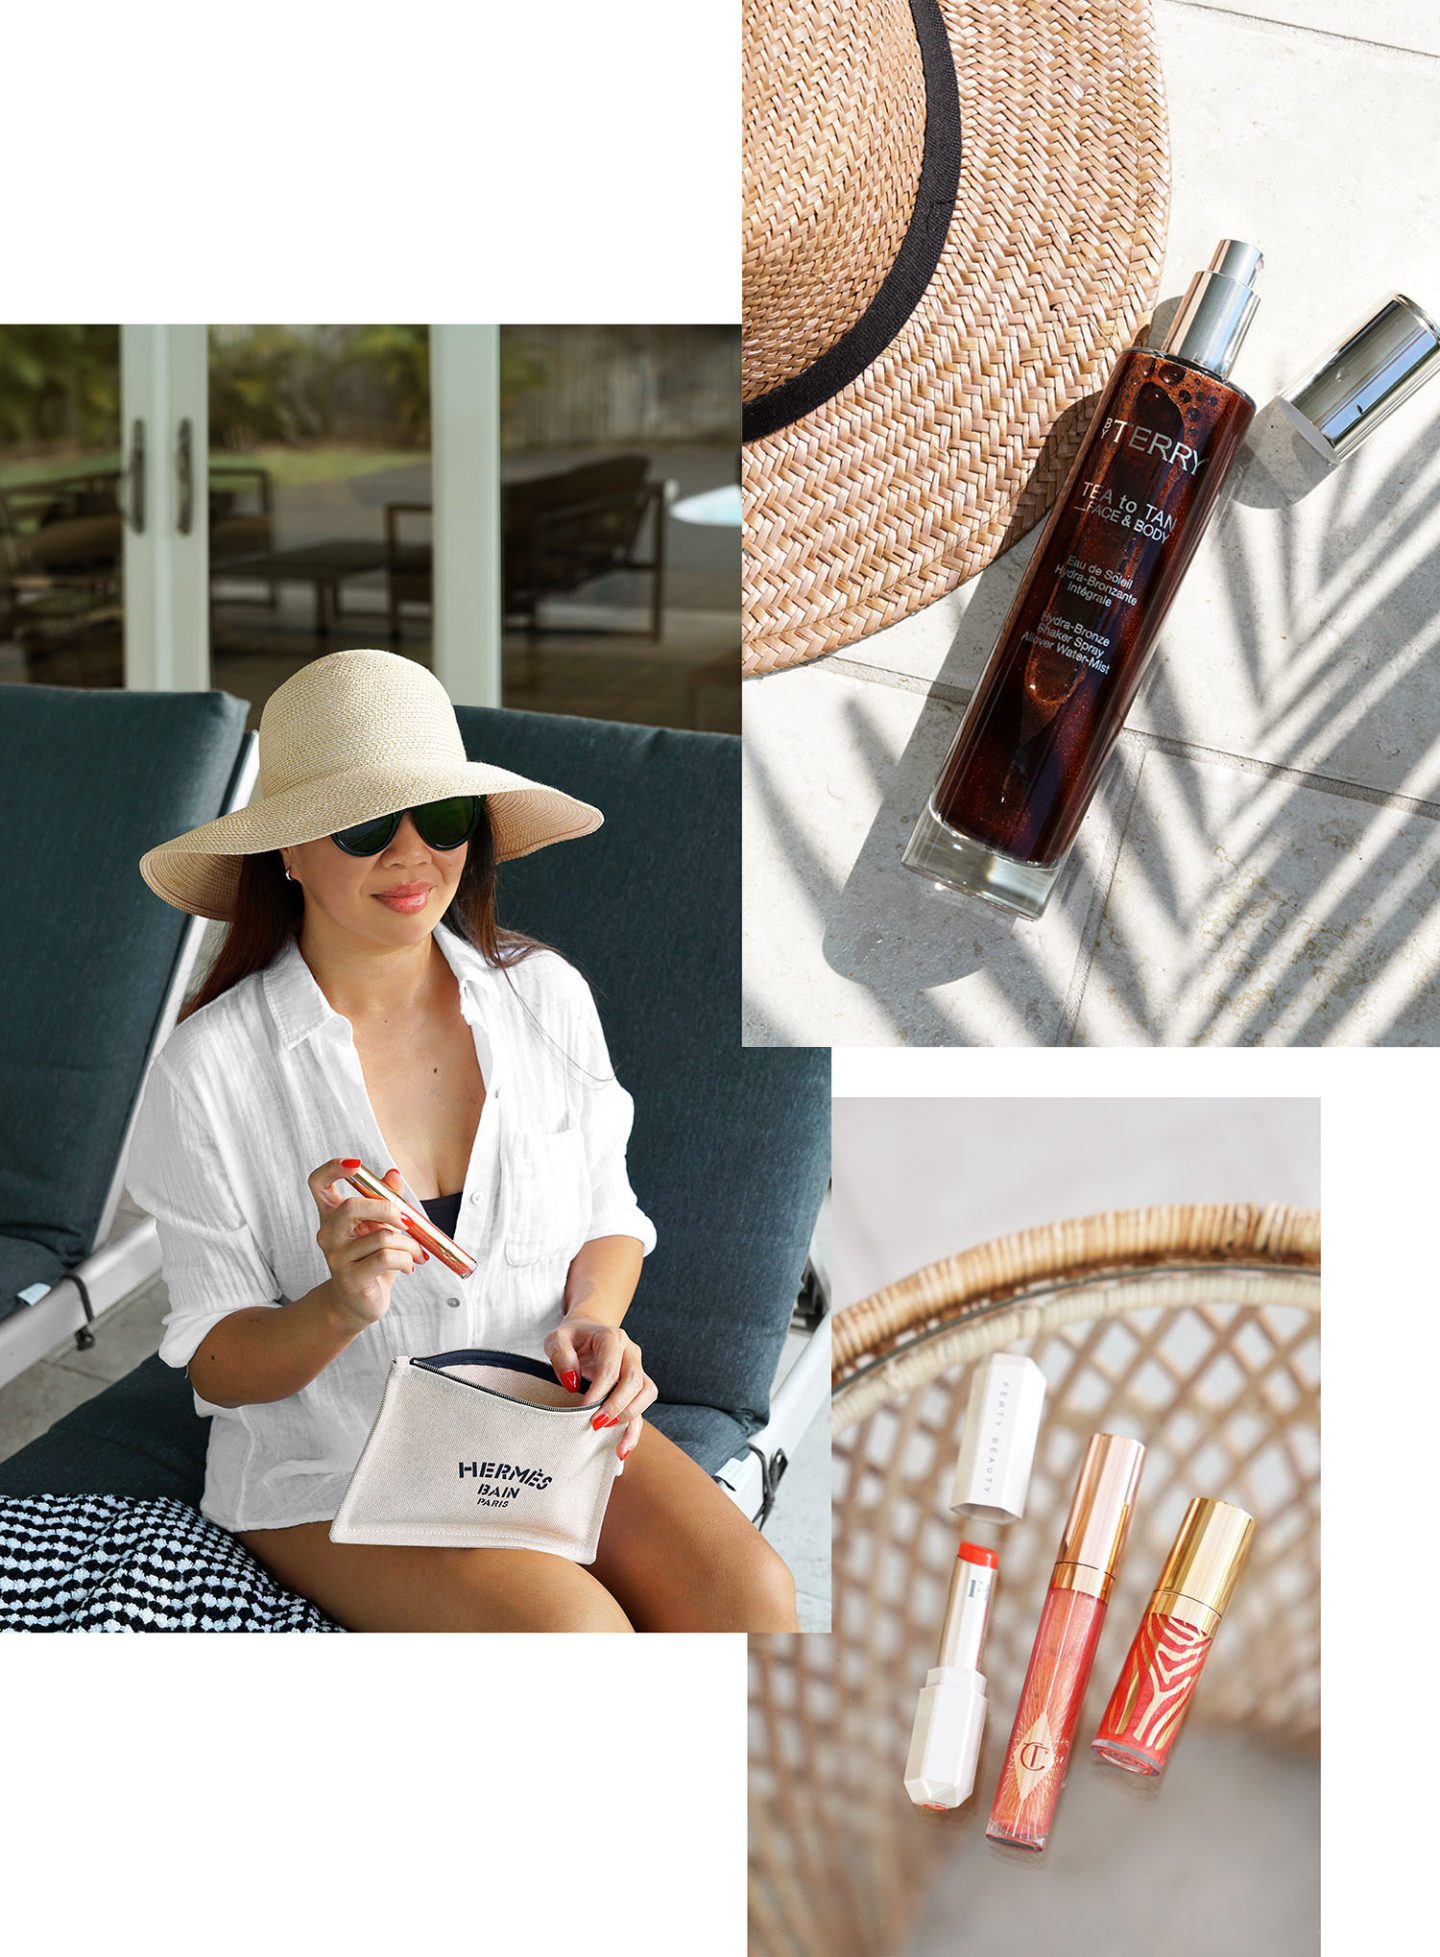 Summer Staples By Terry Tea to Tan Bronzer and Peach Lips Fenty, Sisley and Charlotte Tilbury